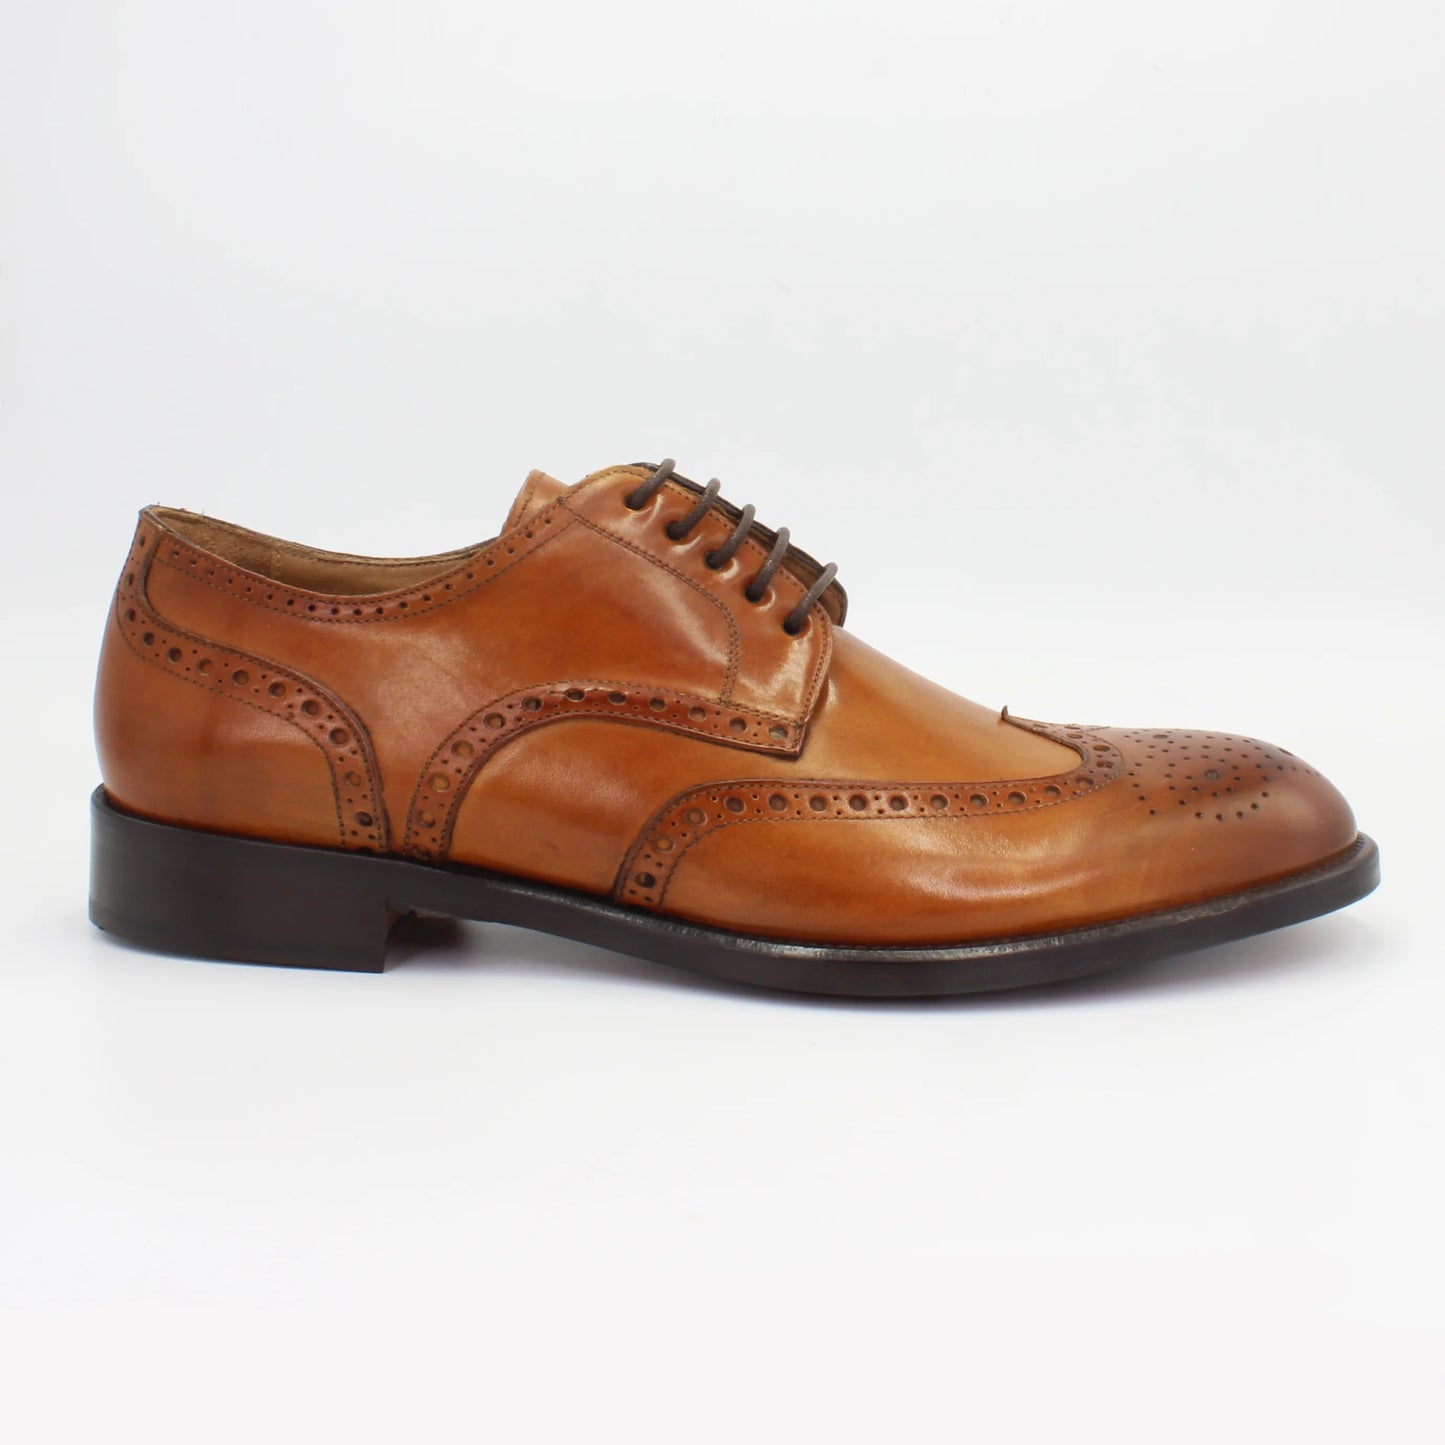 Shop Handmade Italian Leather Oxford in Siena (BRU11226) or browse our range of hand-made Italian shoes for men in leather or suede in-store at Aliverti Cape Town, or shop online. We deliver in South Africa & offer multiple payment plans as well as accept multiple safe & secure payment methods.